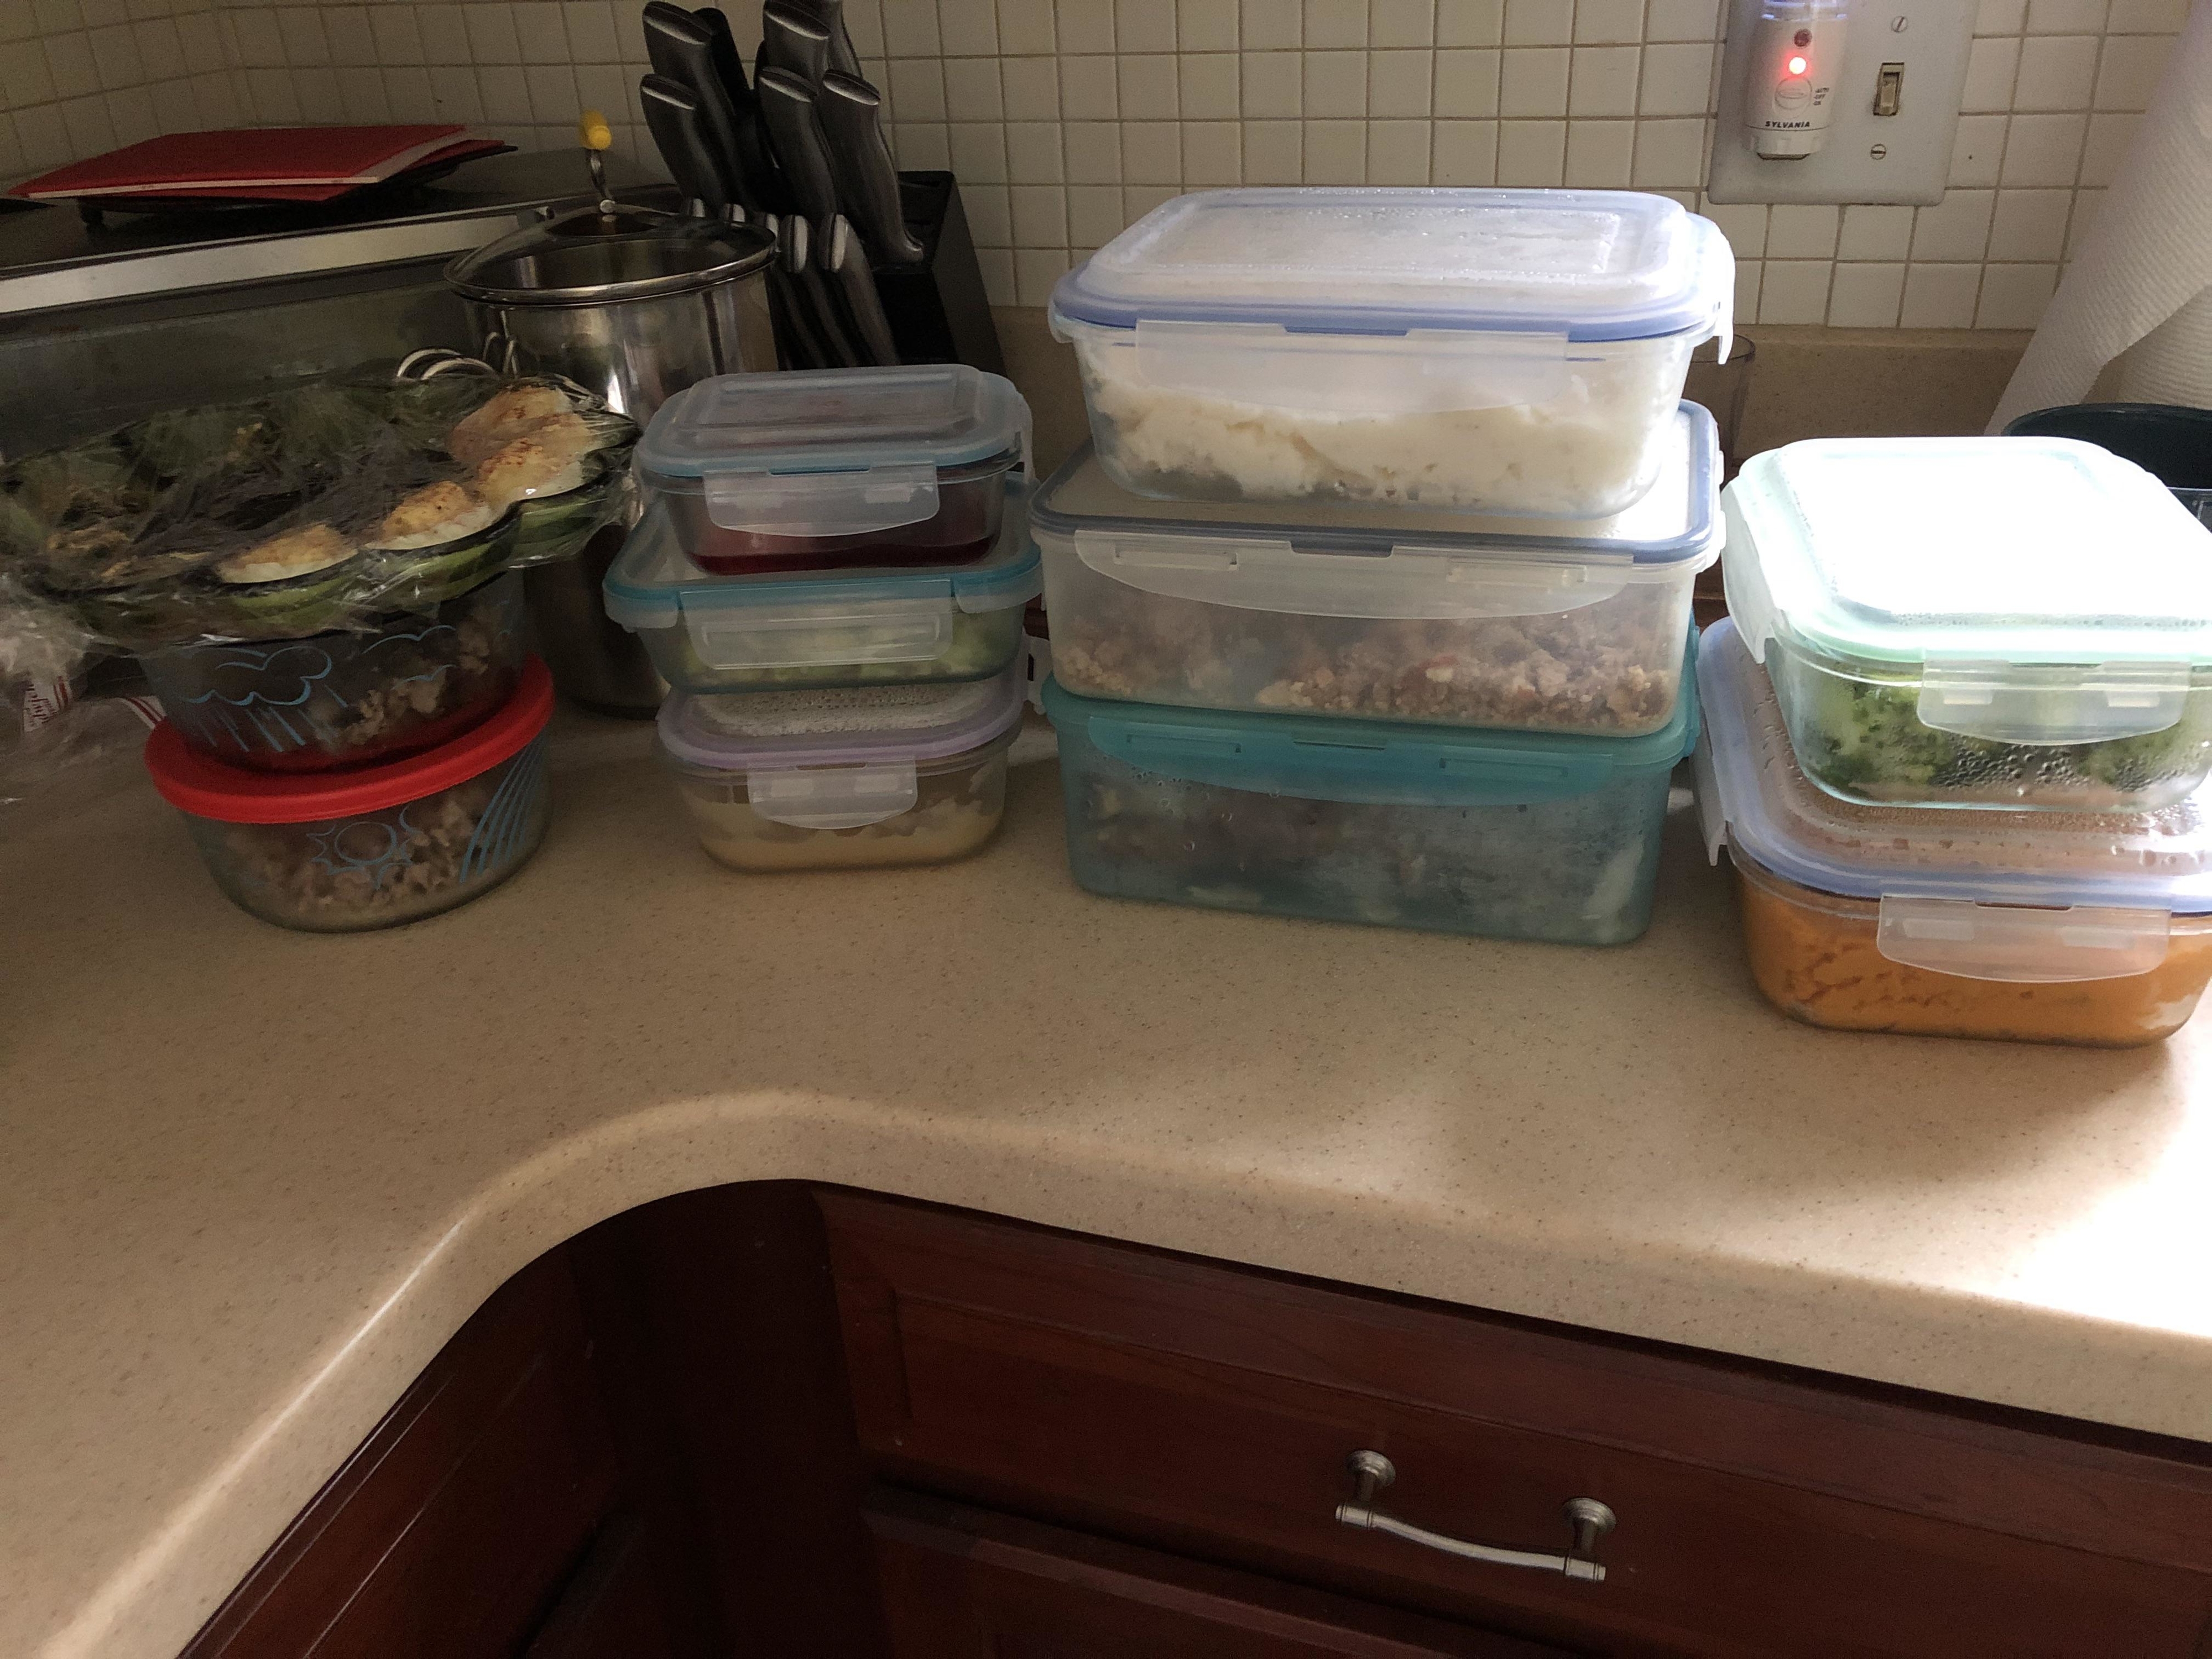 Thanksgiving leftovers in plastic containers on a kitchen counter